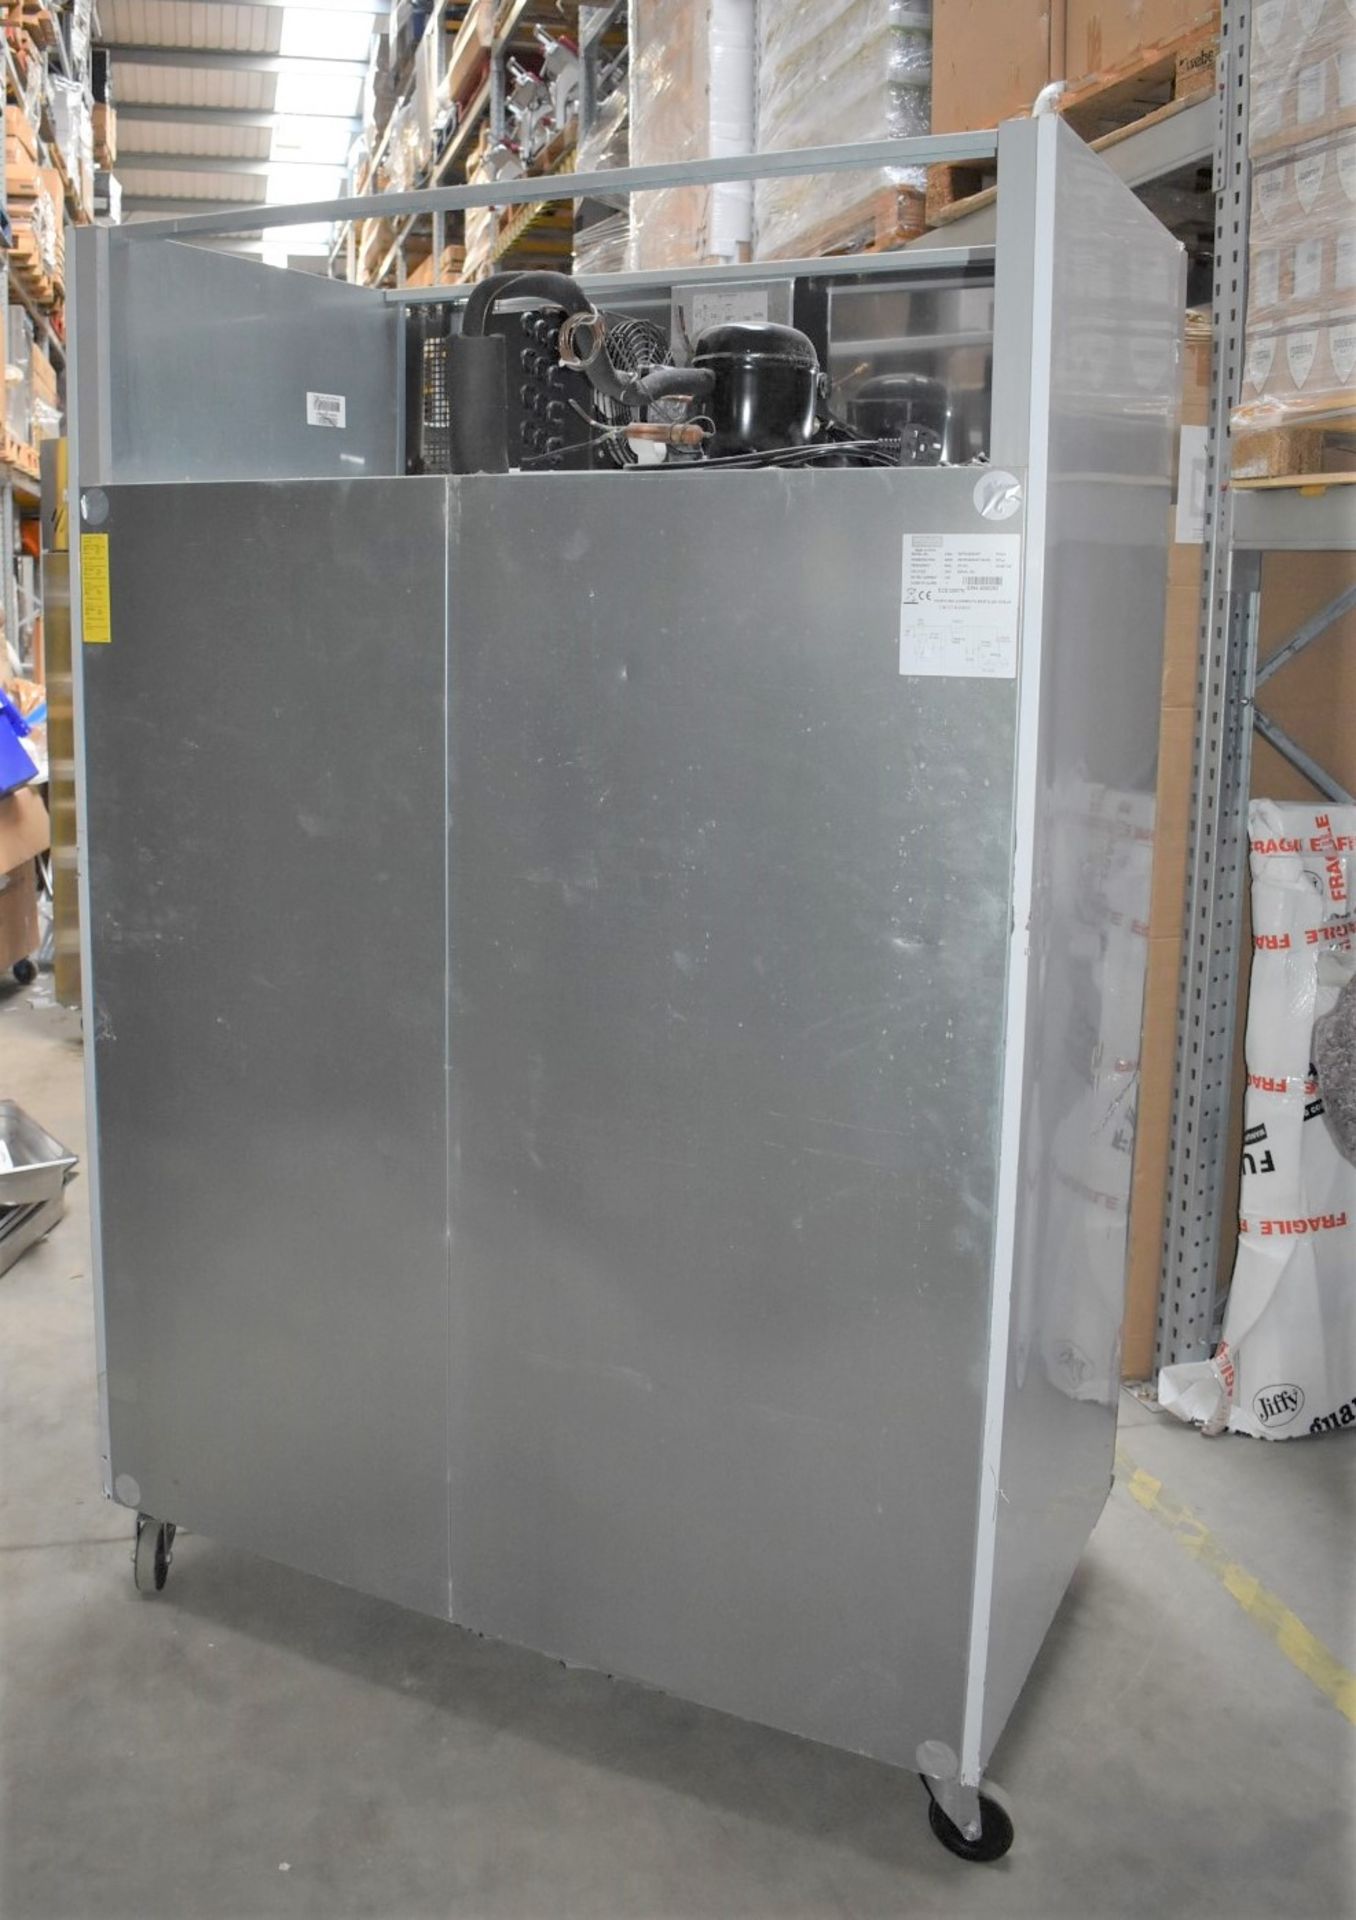 1 x Polar G Series Upright Double Door Refrigerator - Model G594 - Complete With Internal - Image 5 of 18